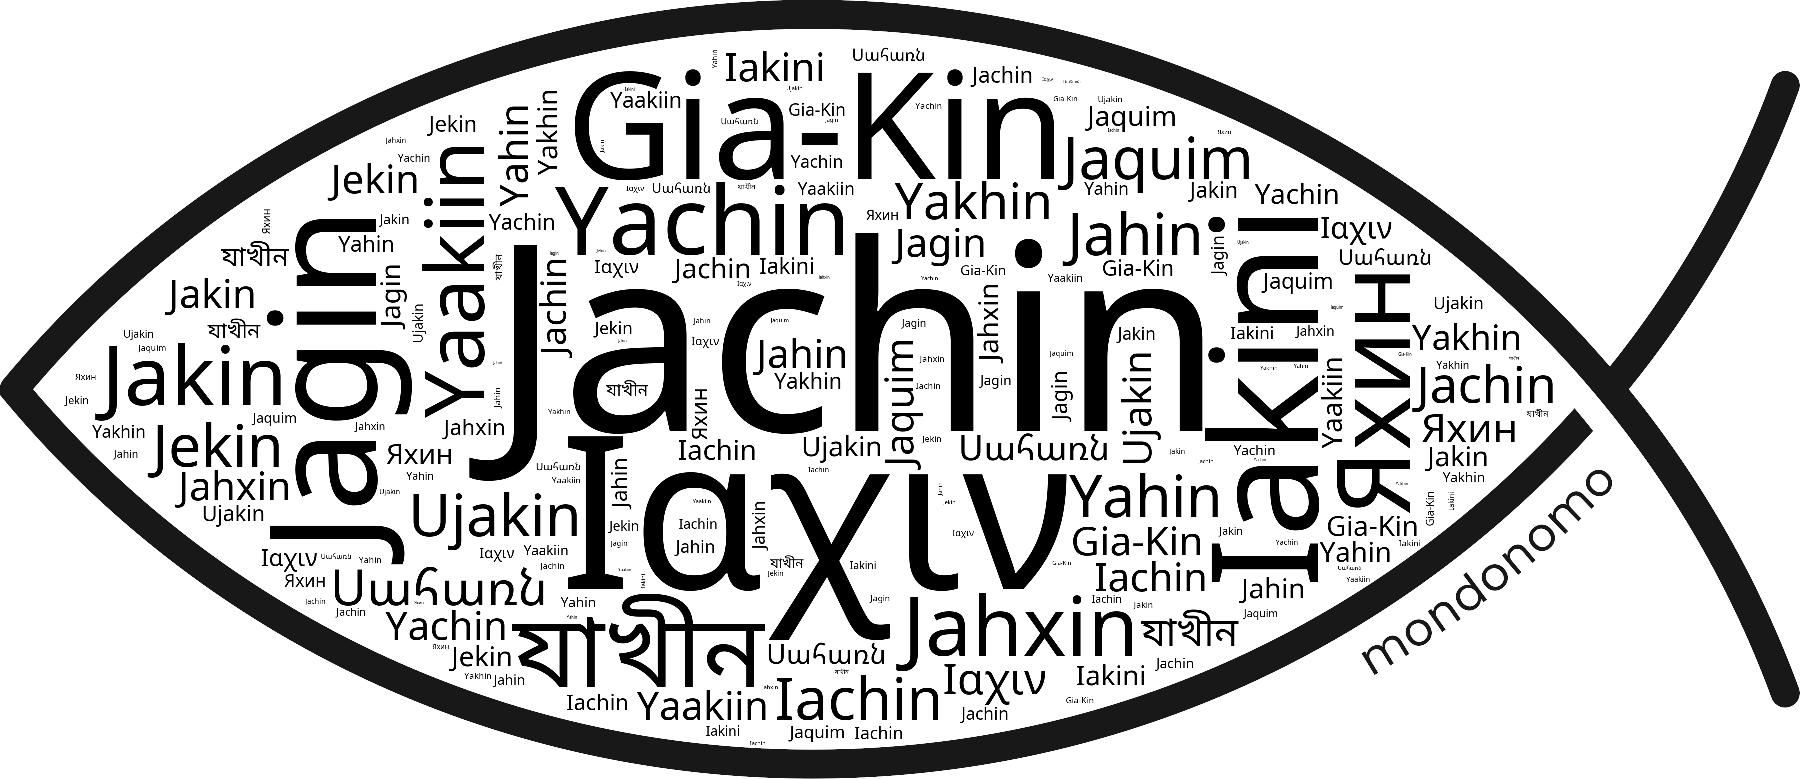 Name Jachin in the world's Bibles